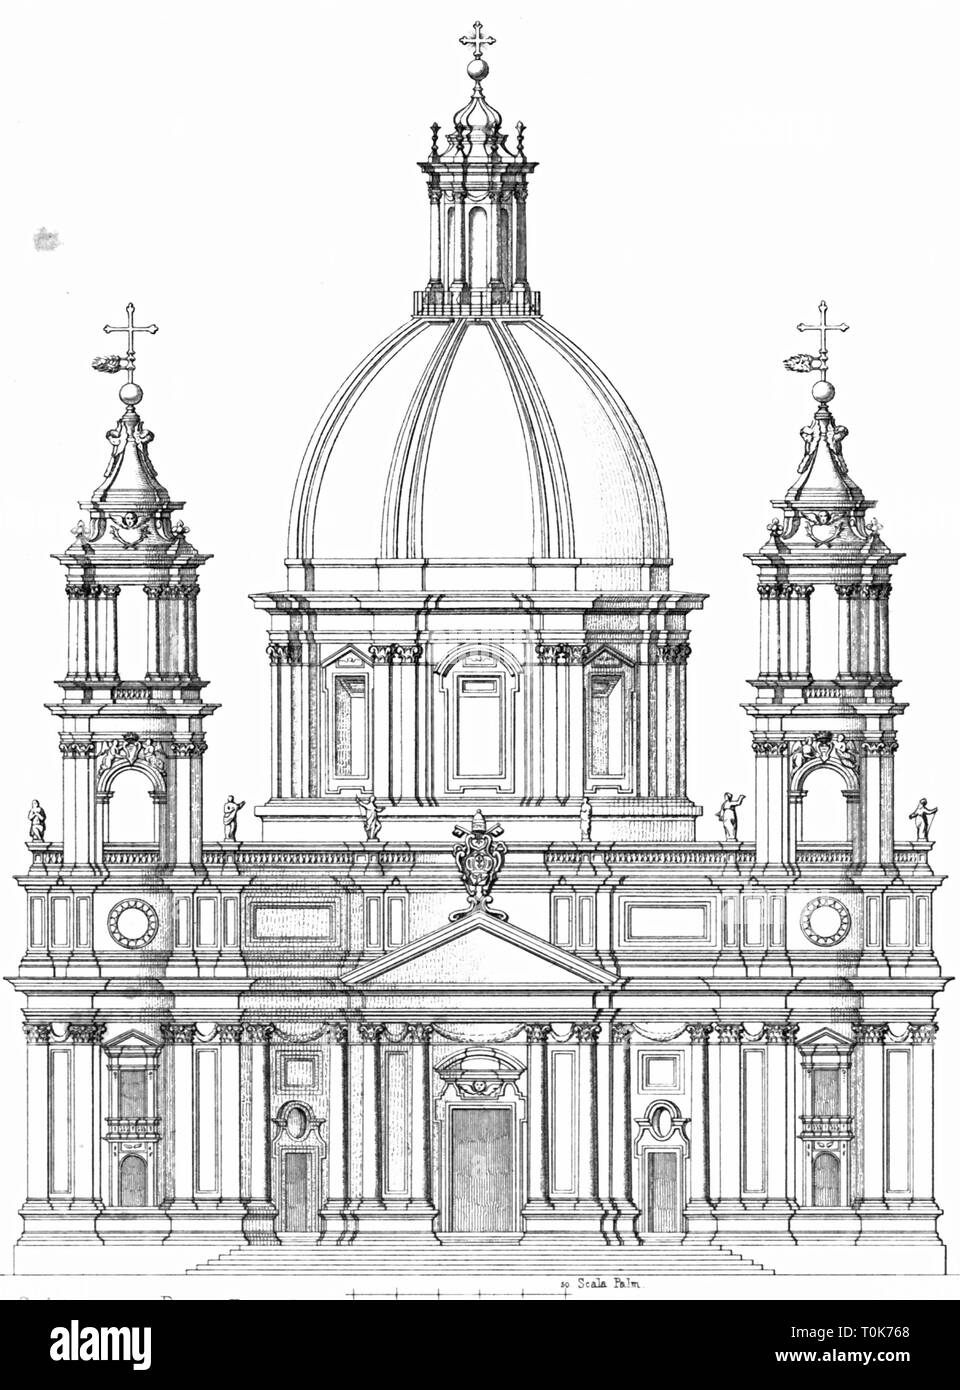 geography / travel, Italy, Rome, churches, Sant'Agnese in Agone, built: 1652 - 1657, architect: Francesco Borromini, illustration from 'Denkmaeler der Kunst' (Monuments of Art), by Wilhelm Luebke and Carl von Luetzow, 3rd edition, Stuttgart 1879, volume 2, steel engraving by H. Gugeler, after drawing by Wilhelm Riefstahl, chapter on architecture, plate XLIX, Southern Europe, churches, architecture, 17th century, church, baroque, sacred, religious, building, buildings, historic, historical, Denkmaler, Denkmäler, Lübke, Lubke, Lützow, Lutzow, Additional-Rights-Clearance-Info-Not-Available Stock Photo